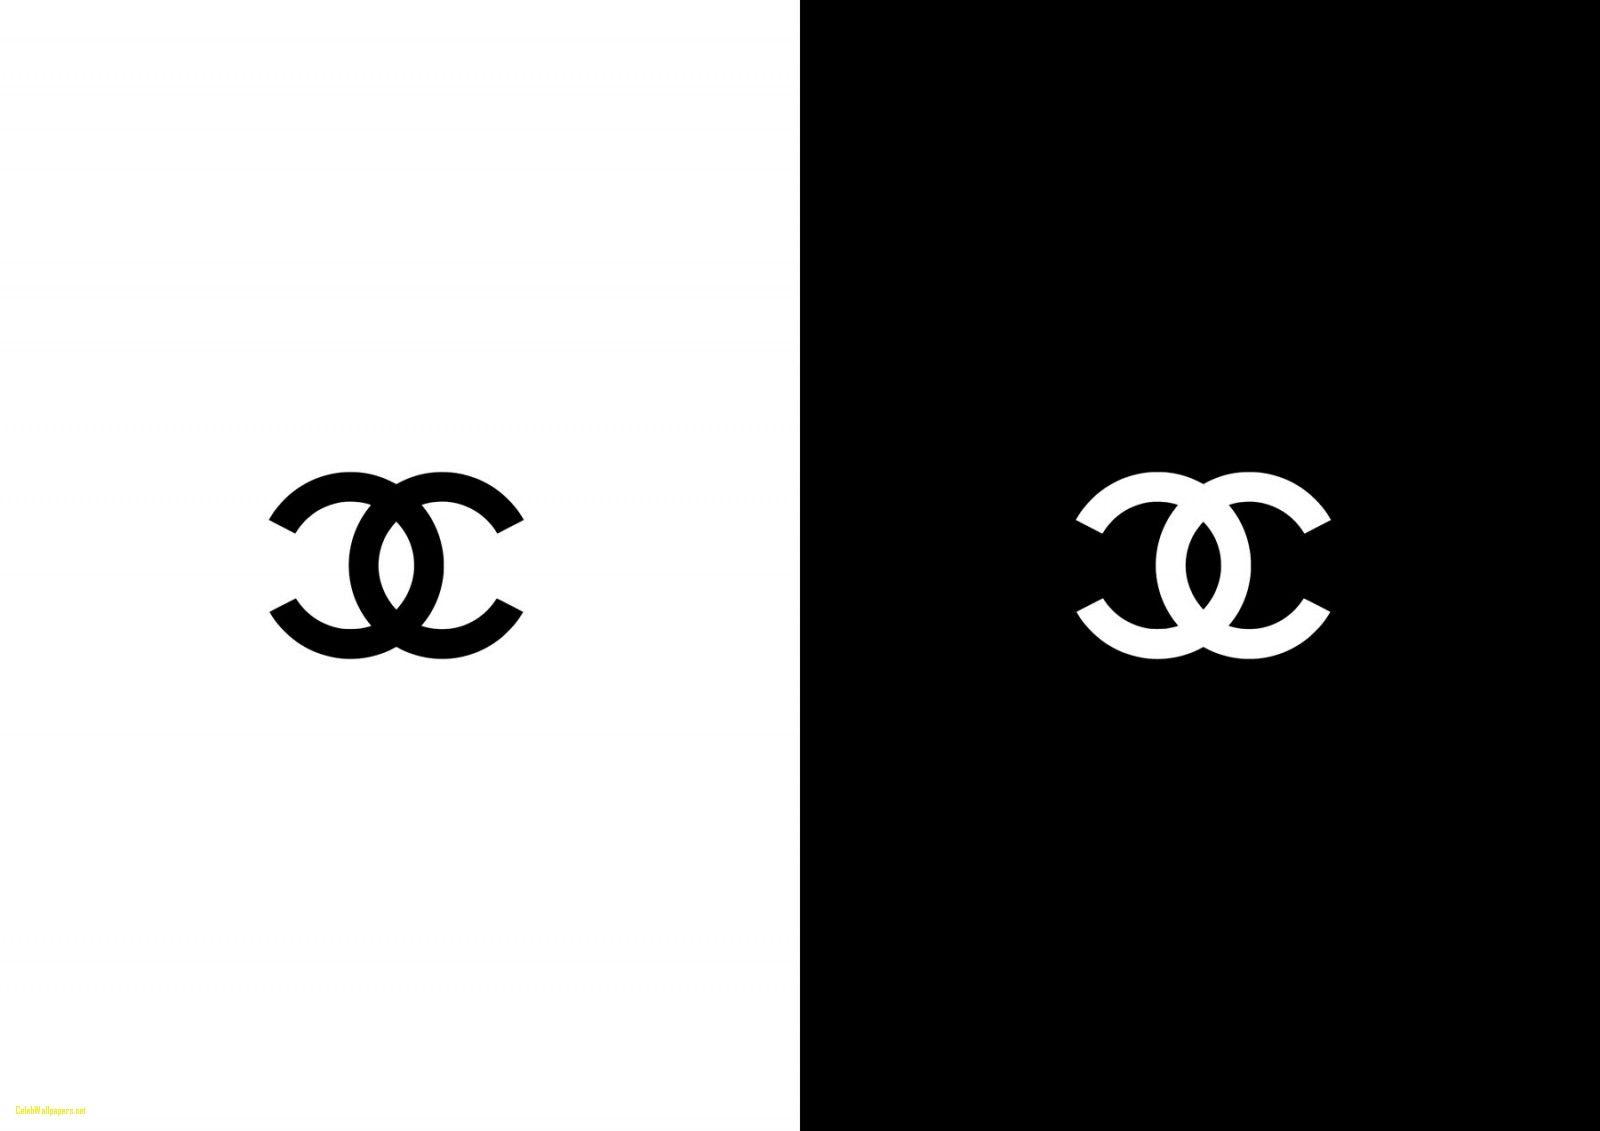 Chanel Wallpapers Inspirational Chanel Wallpapers Black and White Hd